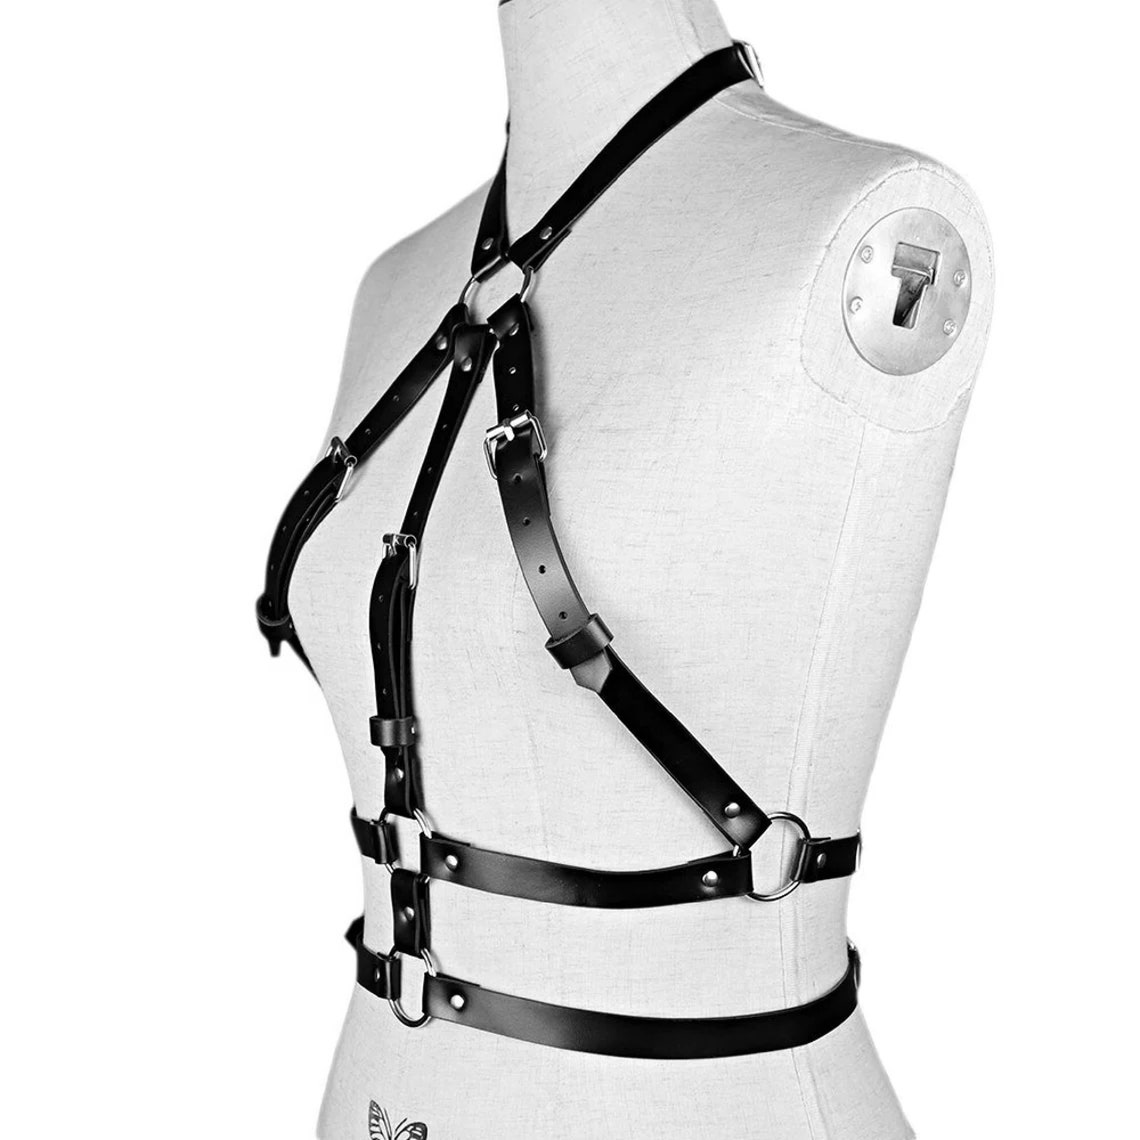 Leather Harness For Women With Open Cup Bra Full Body Bdsm Etsy